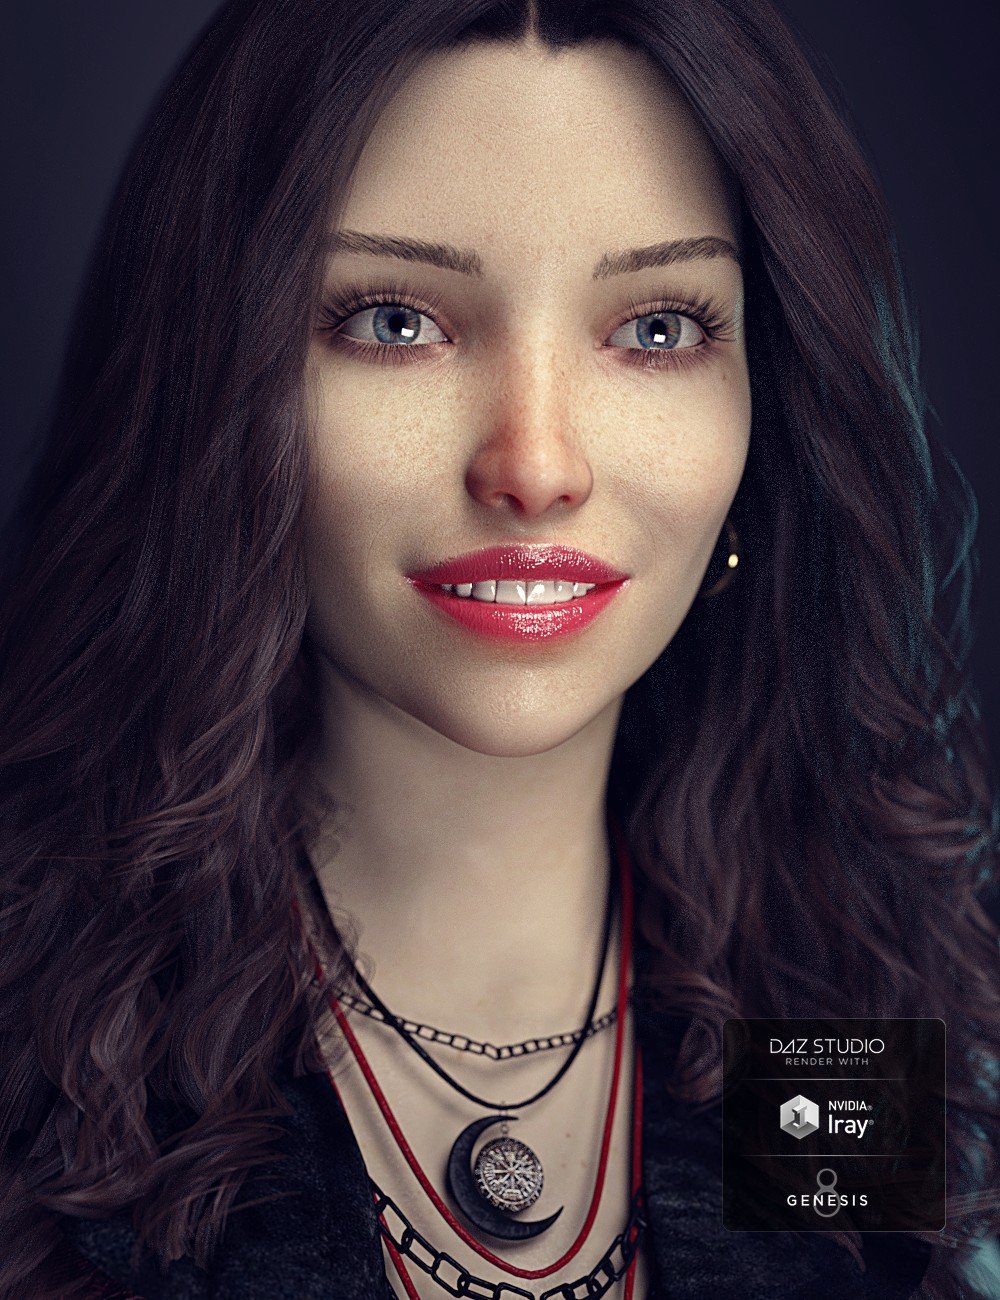 SC Callisto HD for Genesis 8 Female by: Second-Circle, 3D Models by Daz 3D